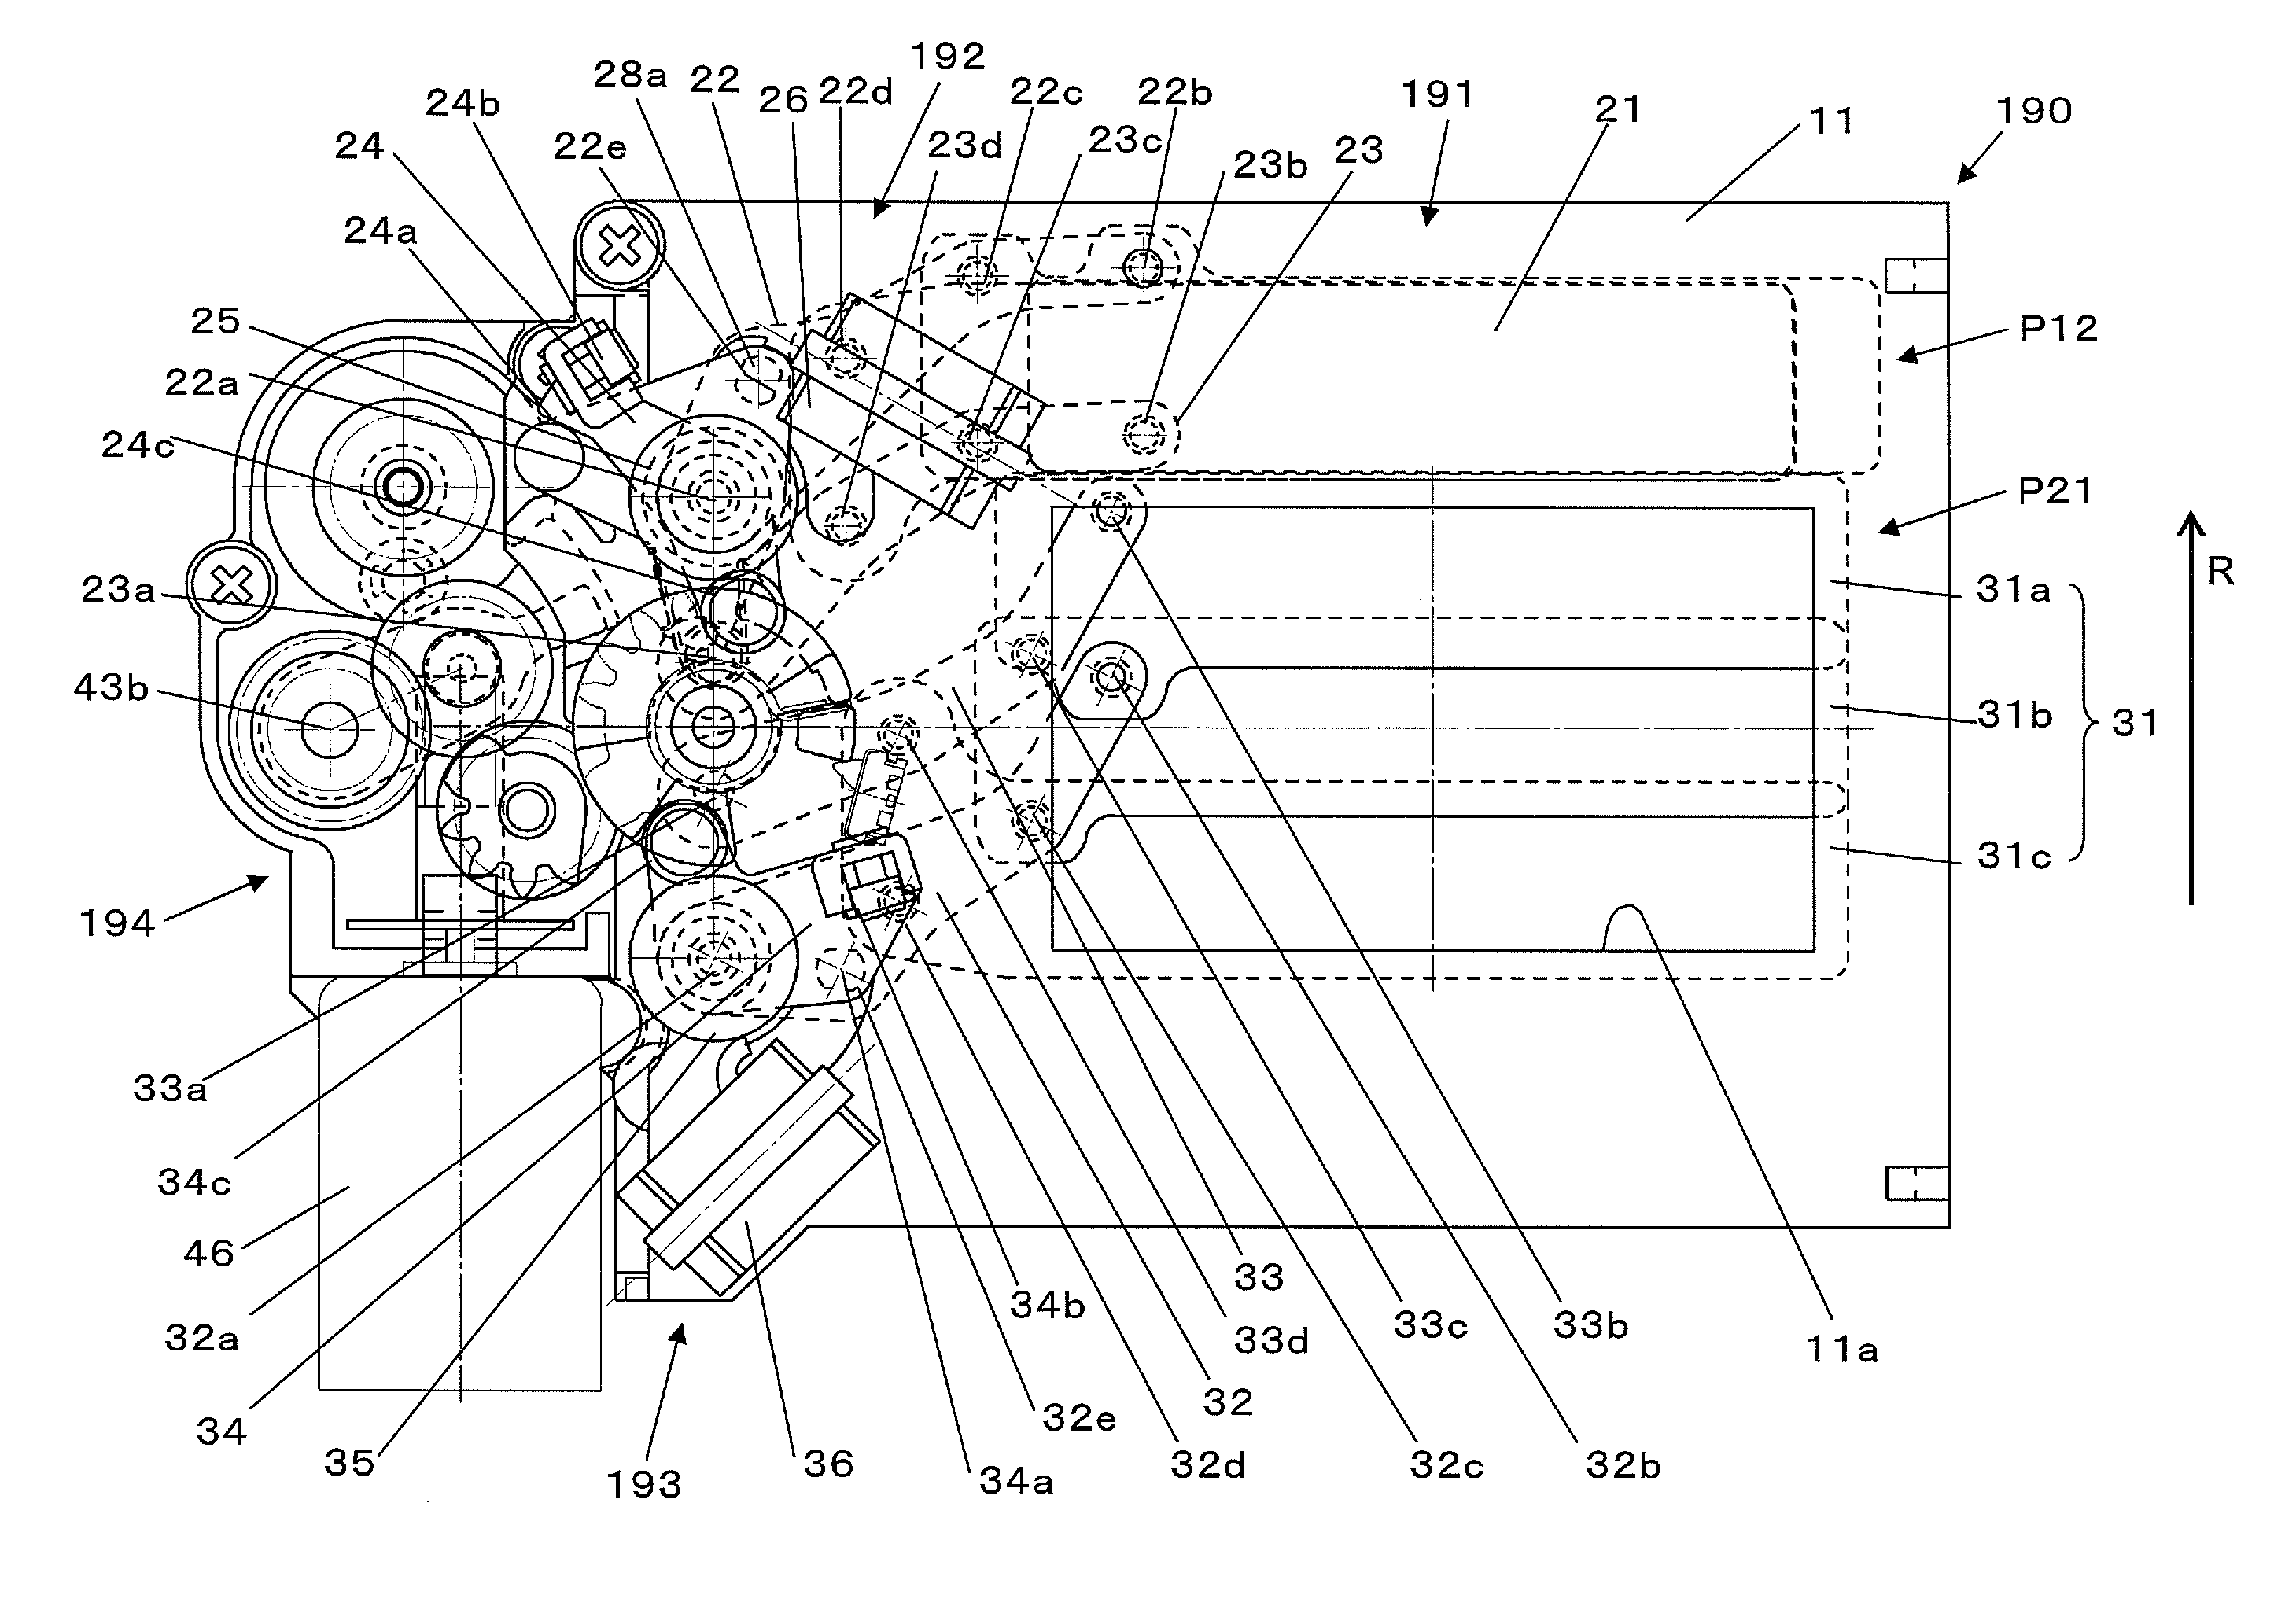 Focal plane shutter device and imaging device